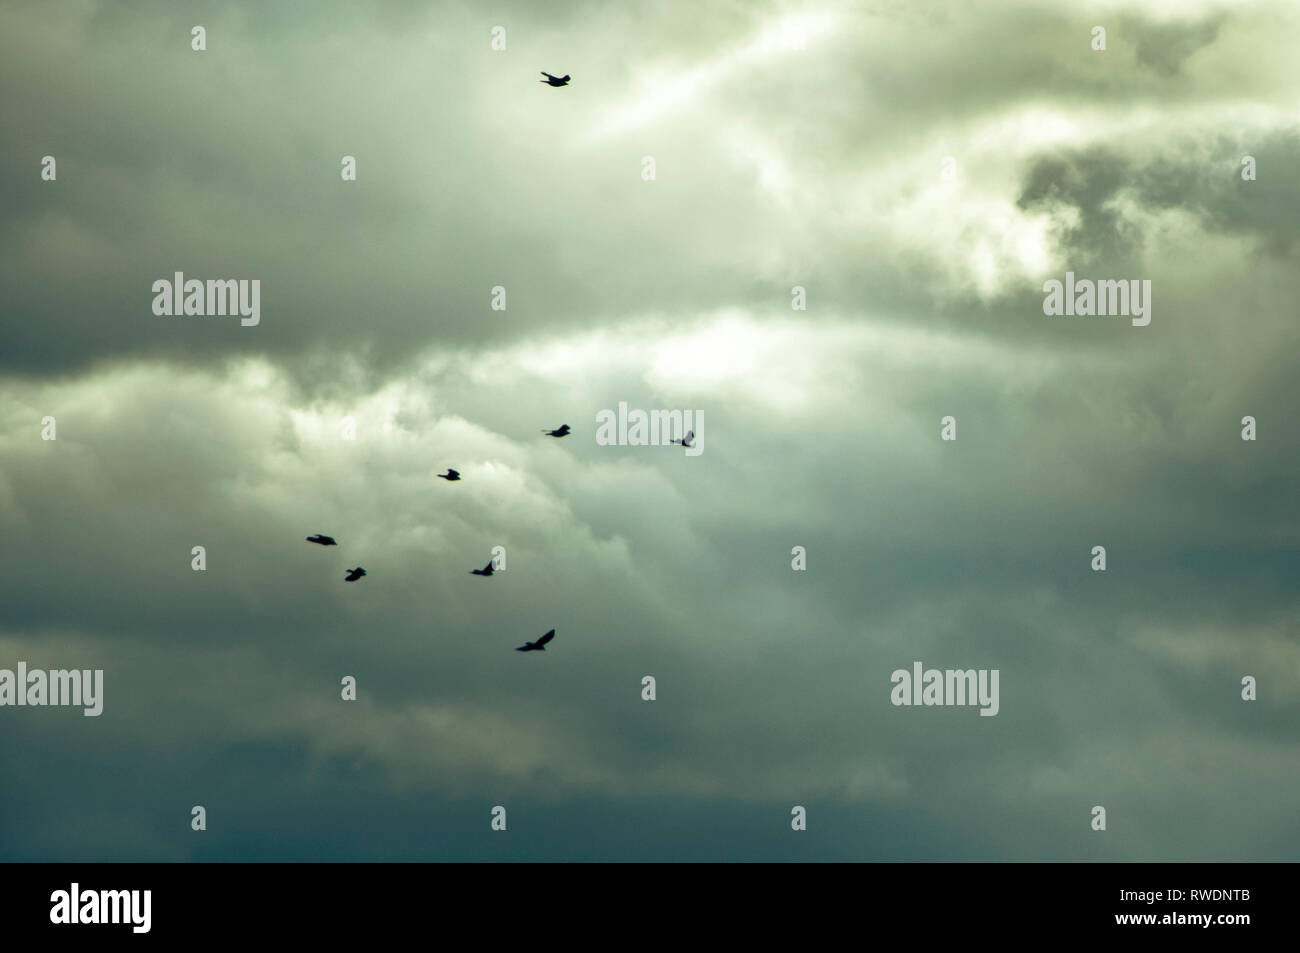 dramatic sky and flock of birds - image for book cover Stock Photo